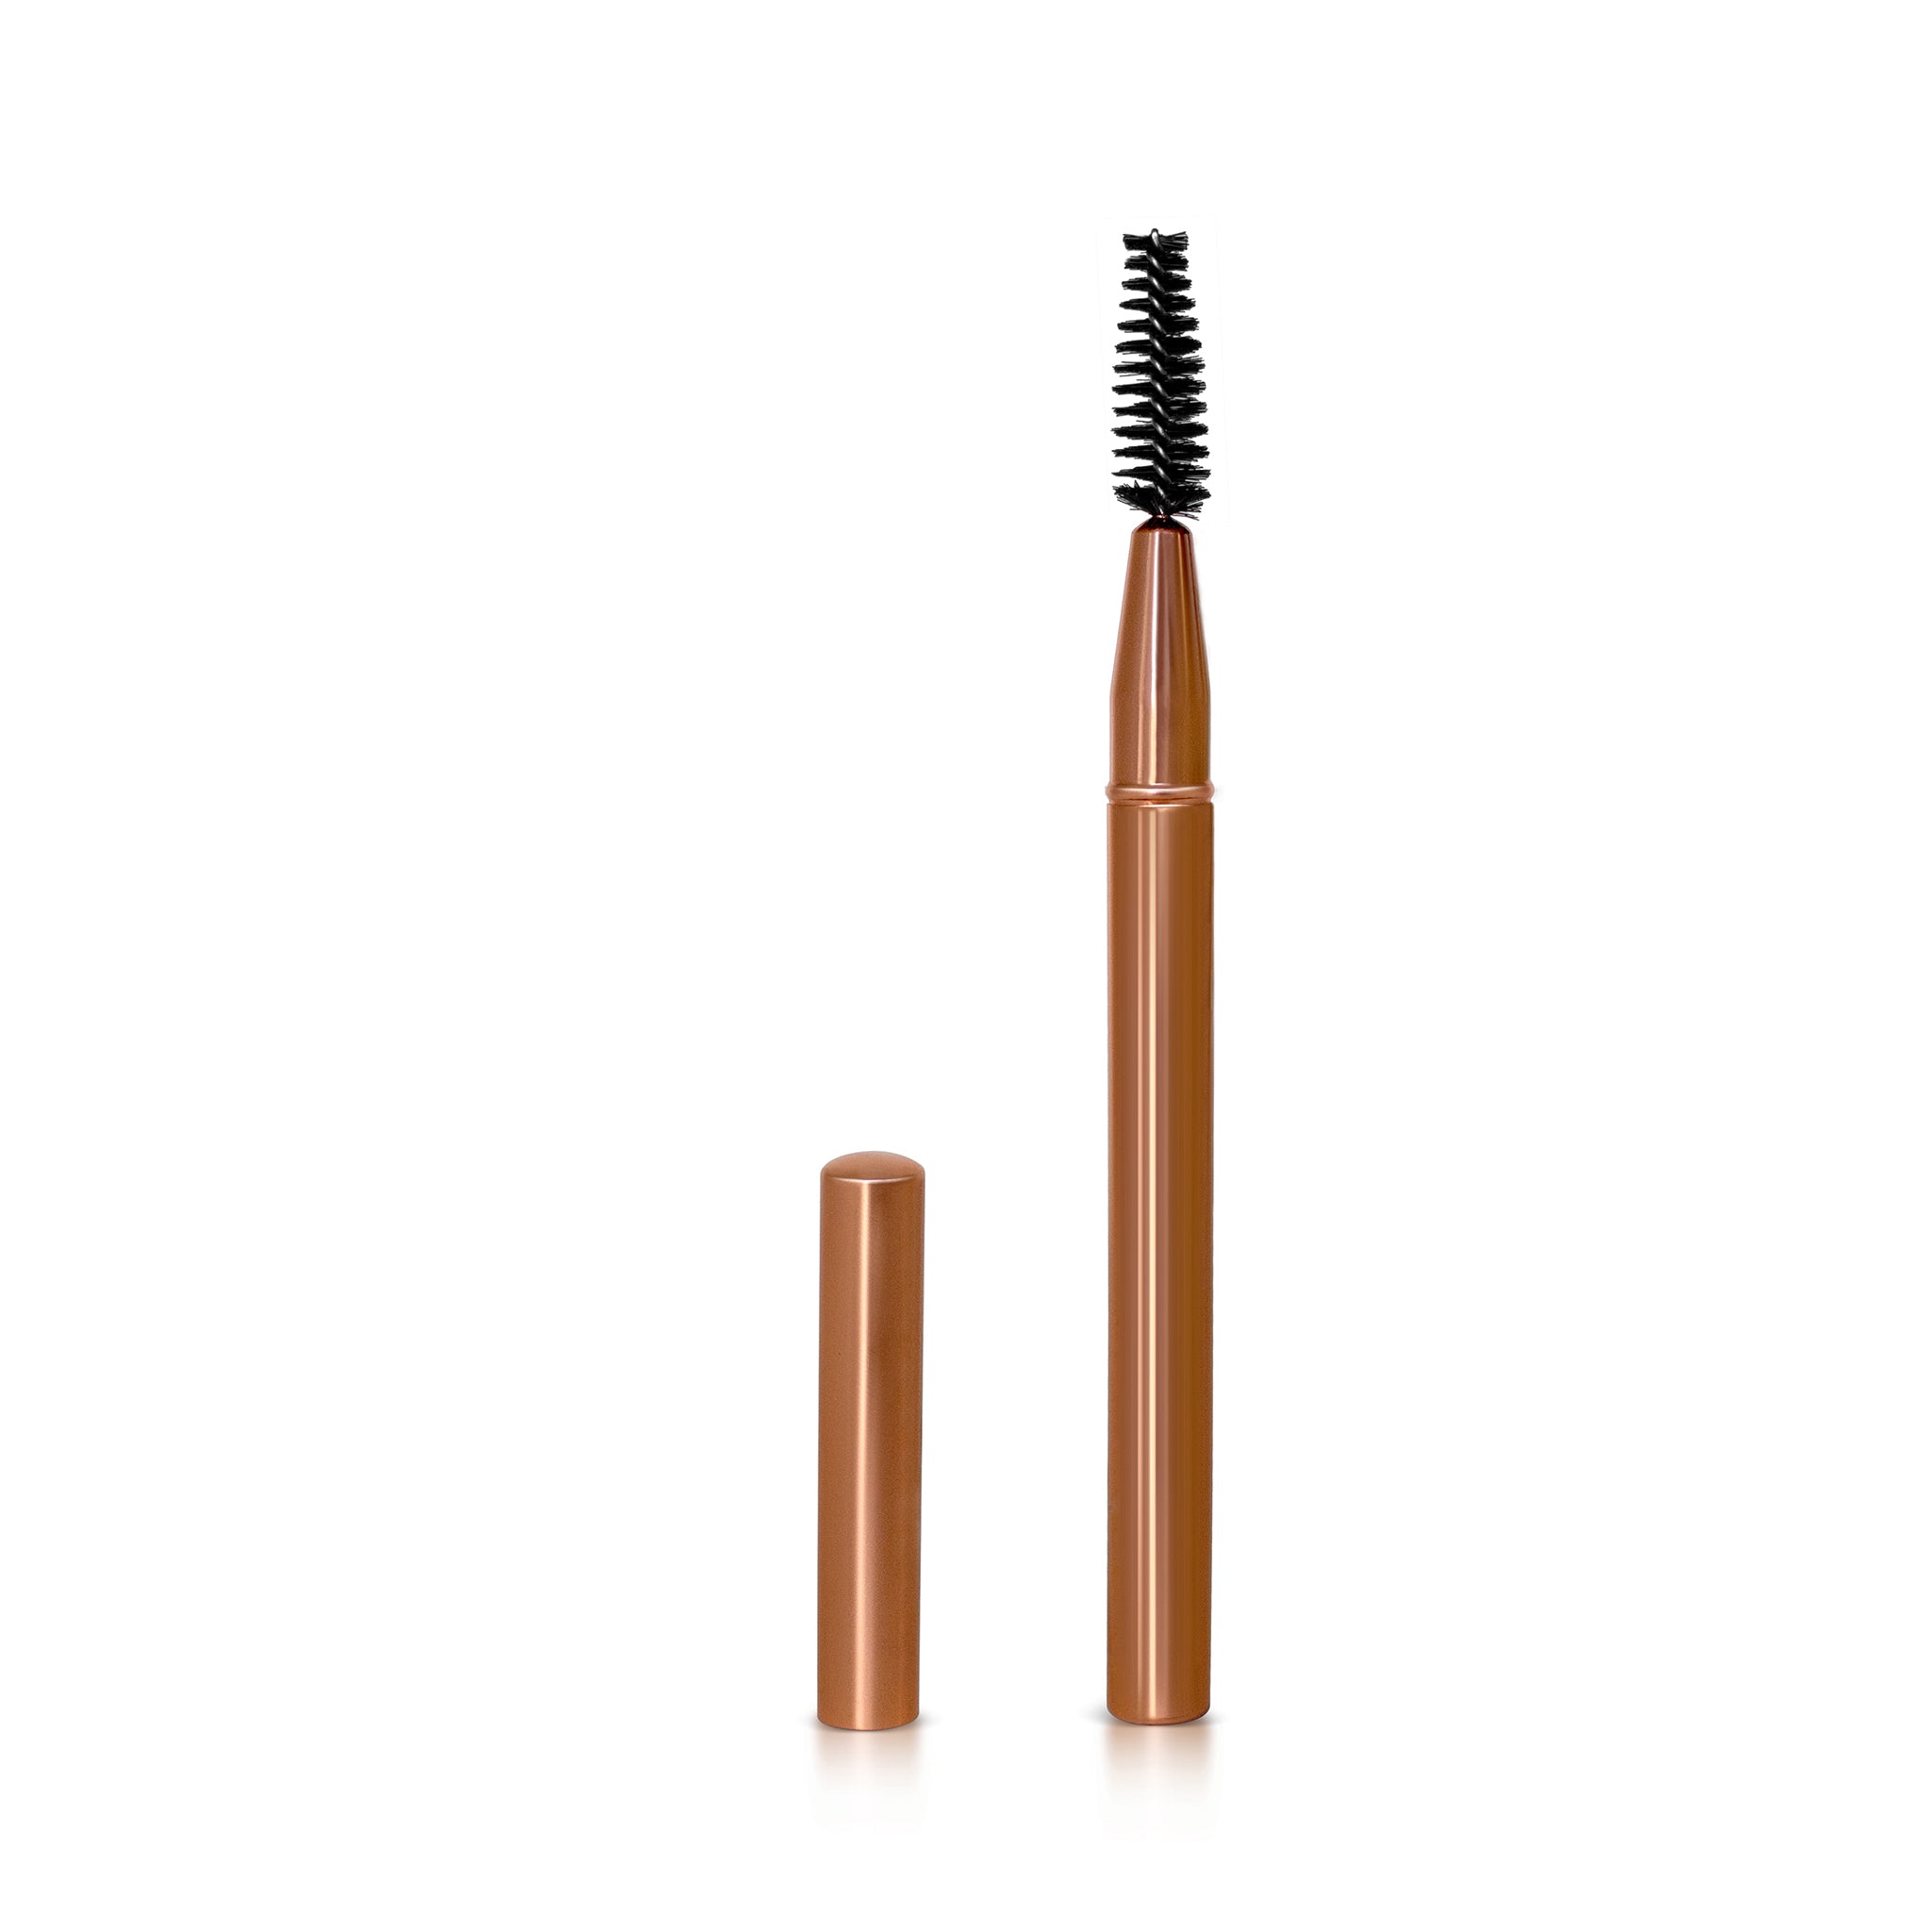 Unbranded Mascara Wand with Cap - Rose Gold